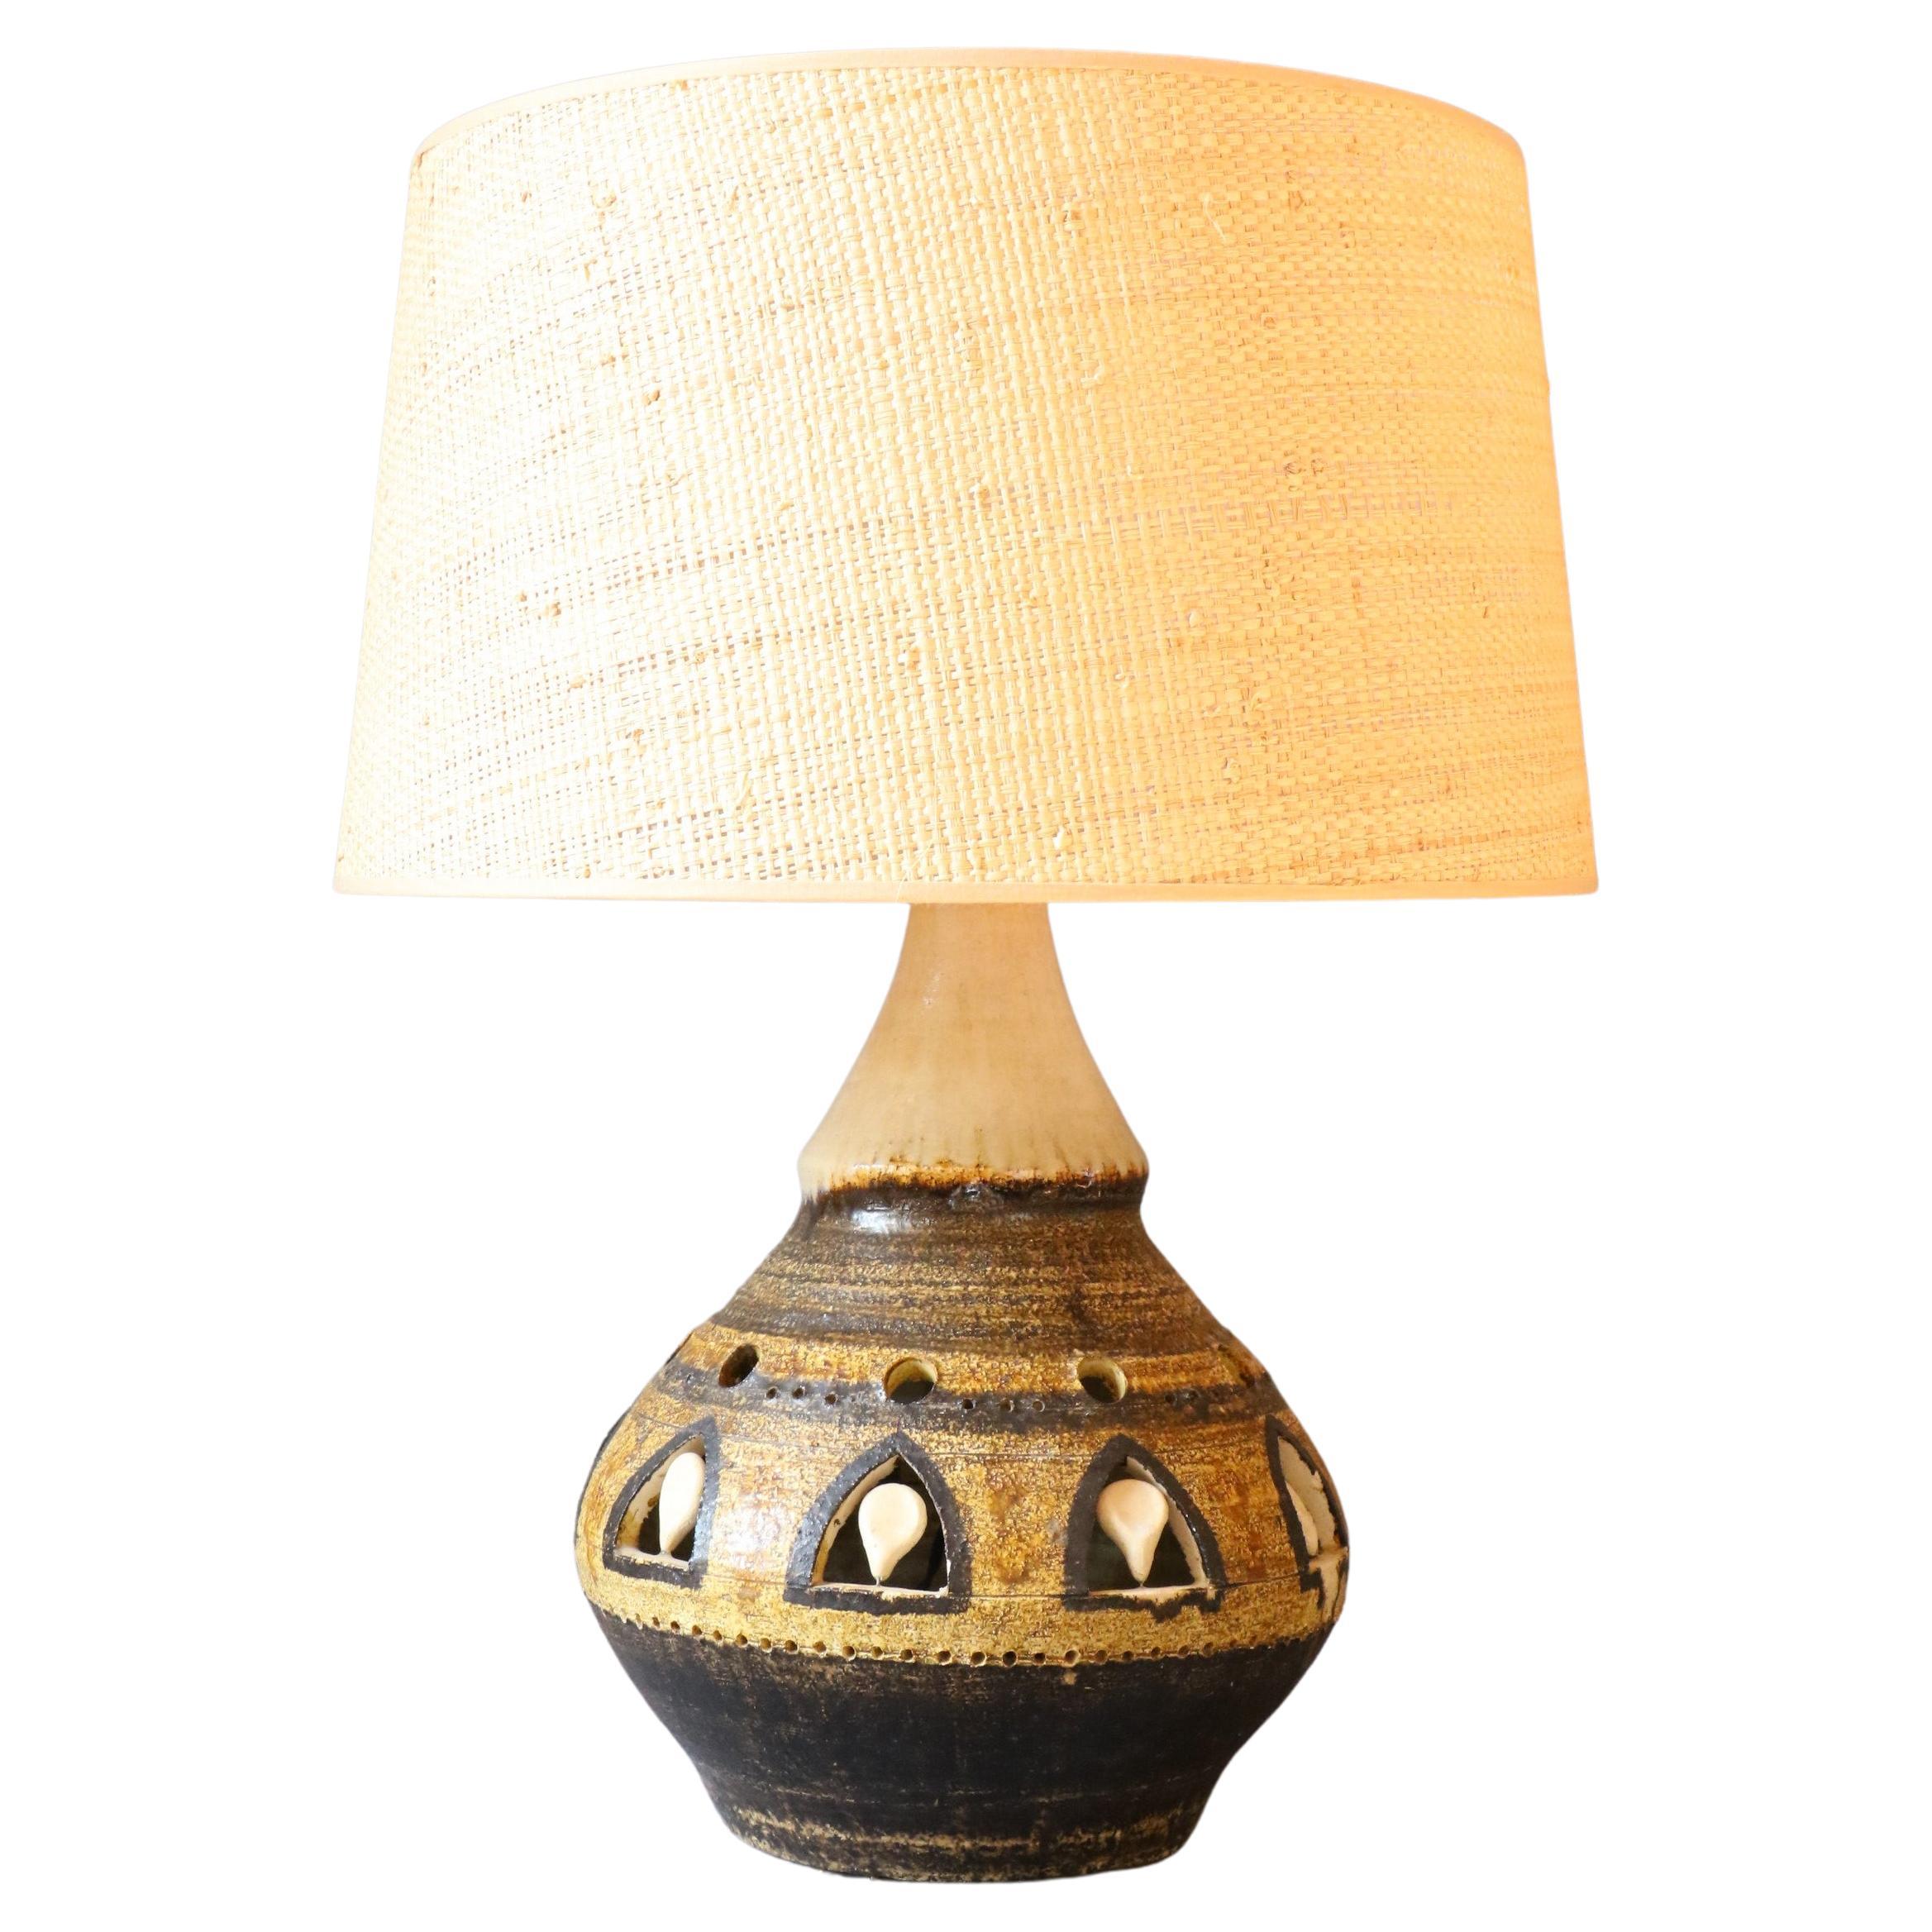 Massive Double Lighting Ceramic Lamp by Georges Pelletier, 1970s, France For Sale